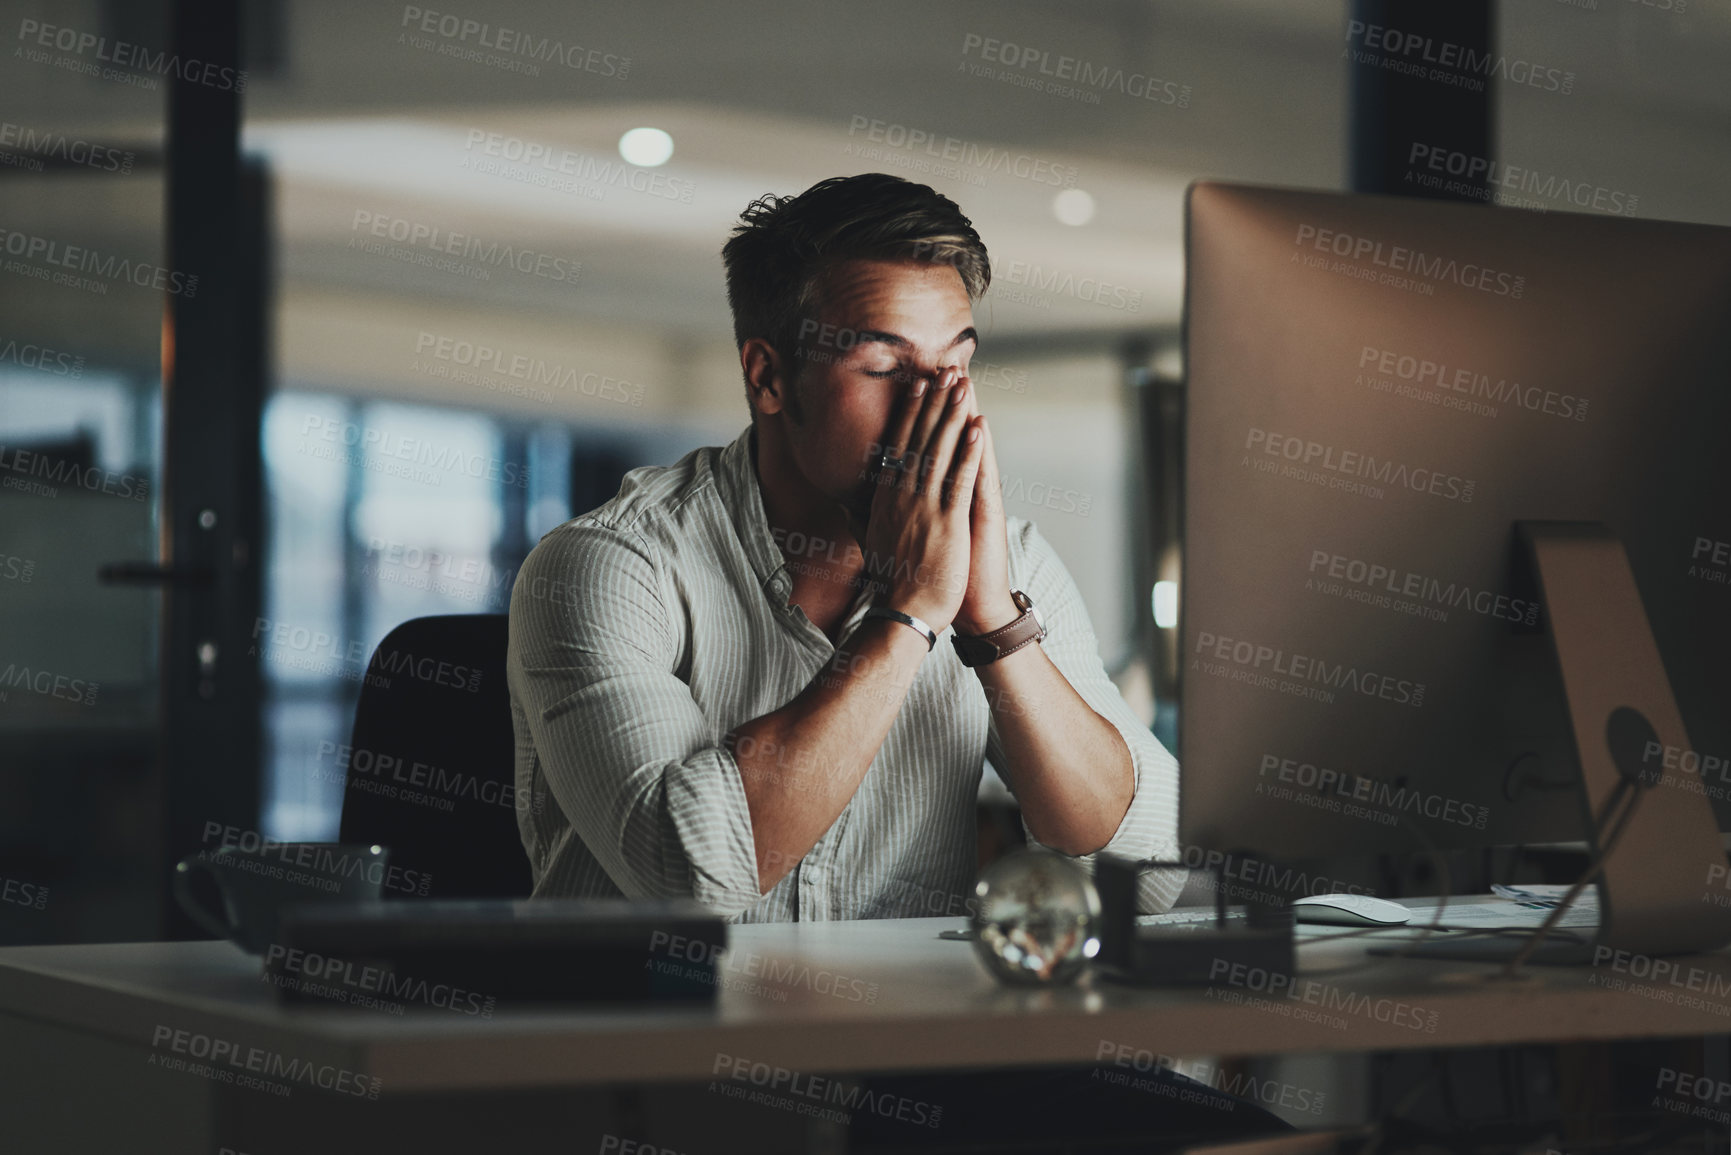 Buy stock photo Shot of a young businessman looking stressed out while working on a computer in an office at night